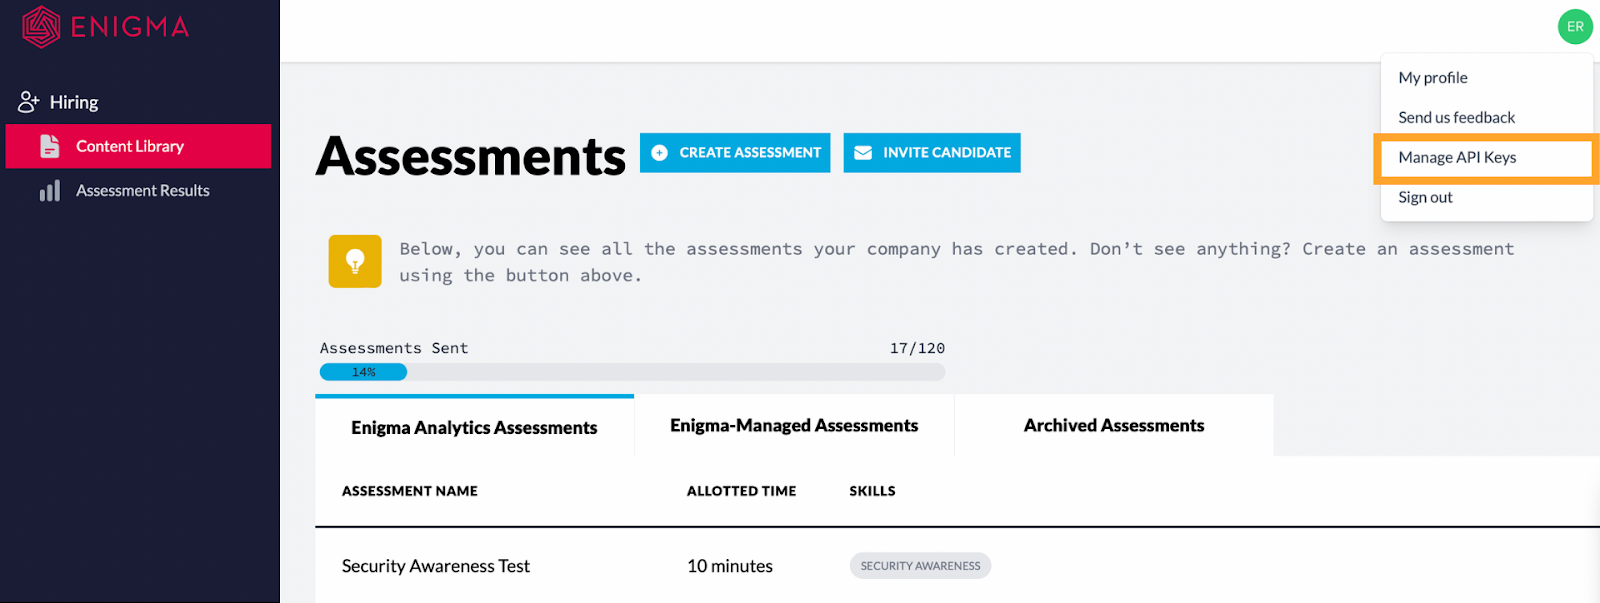 Manage_API_Keys_highlighted_in_marigold_on_Enigma_s_Assessments_dashboard.png